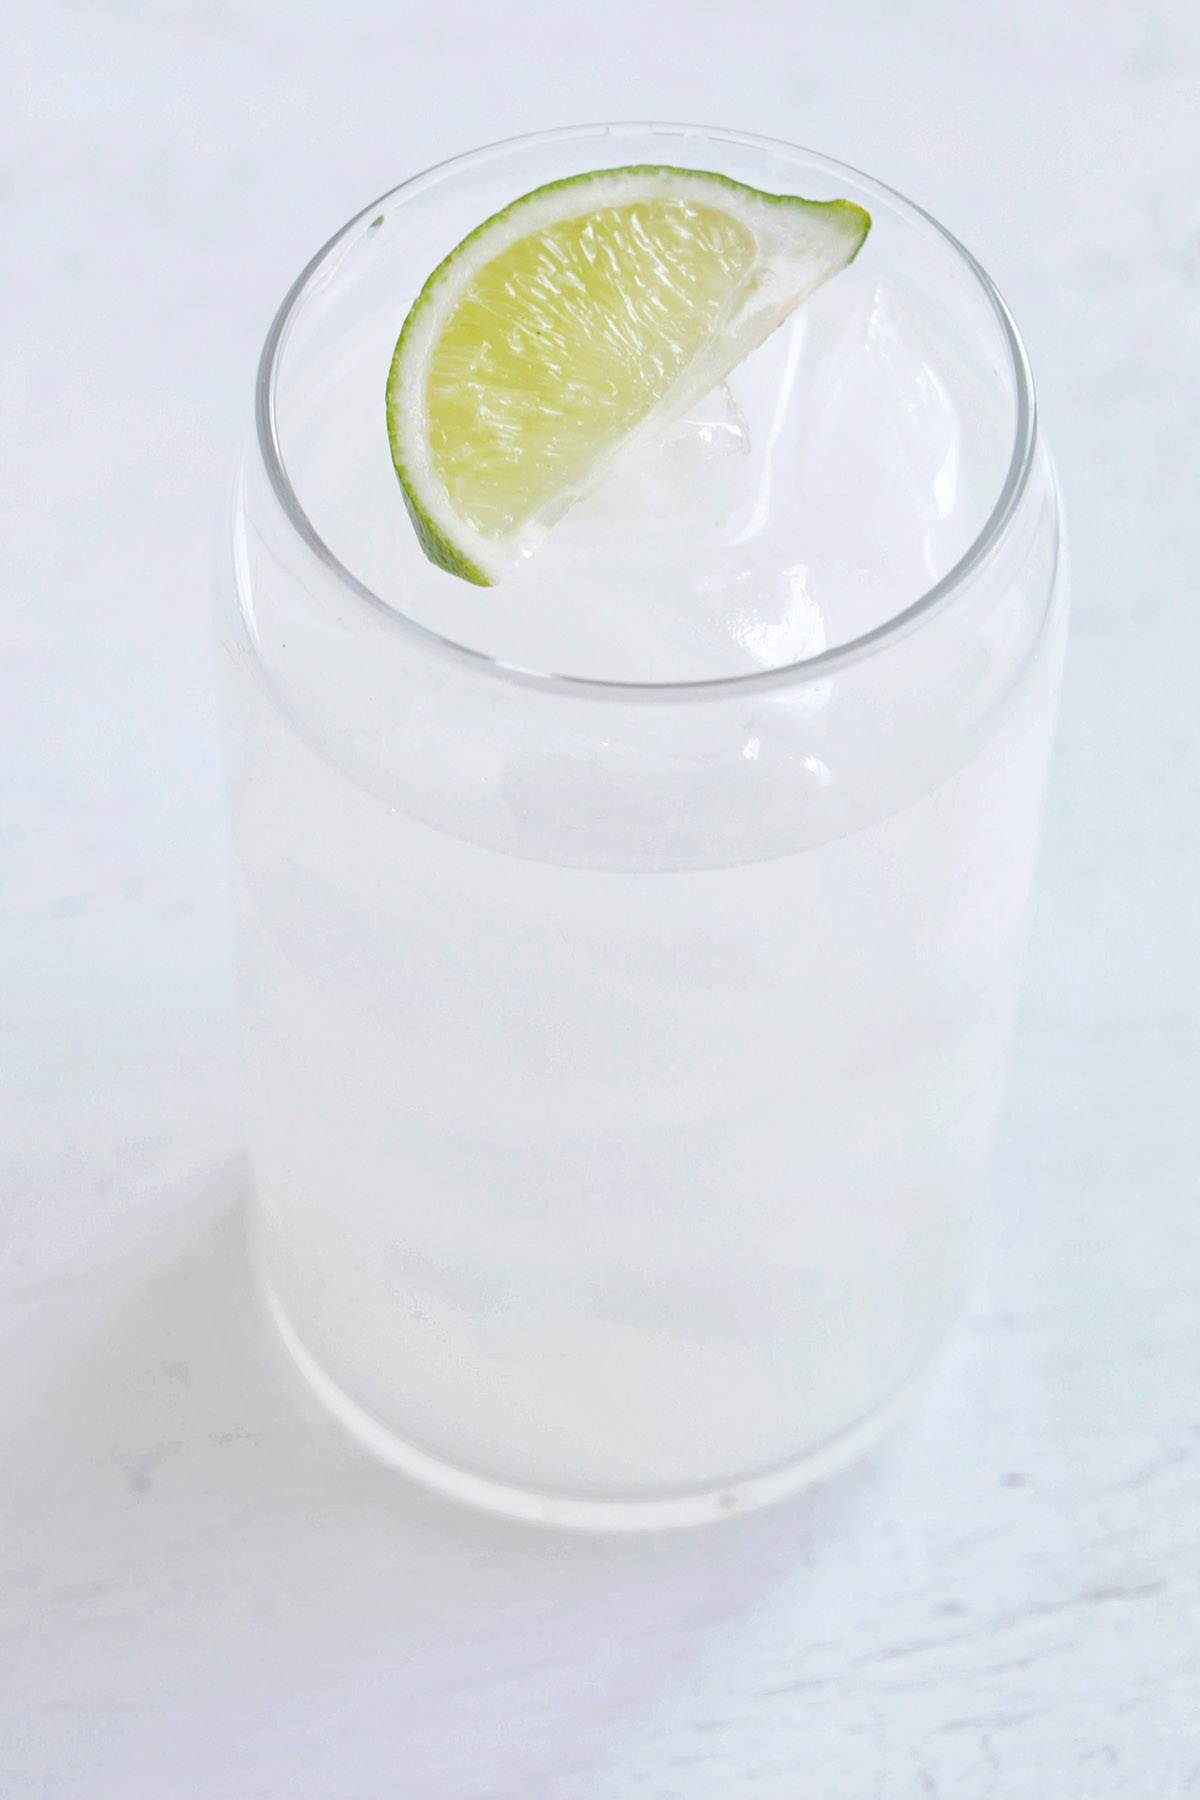 rum and coconut water drink with lime garnish.